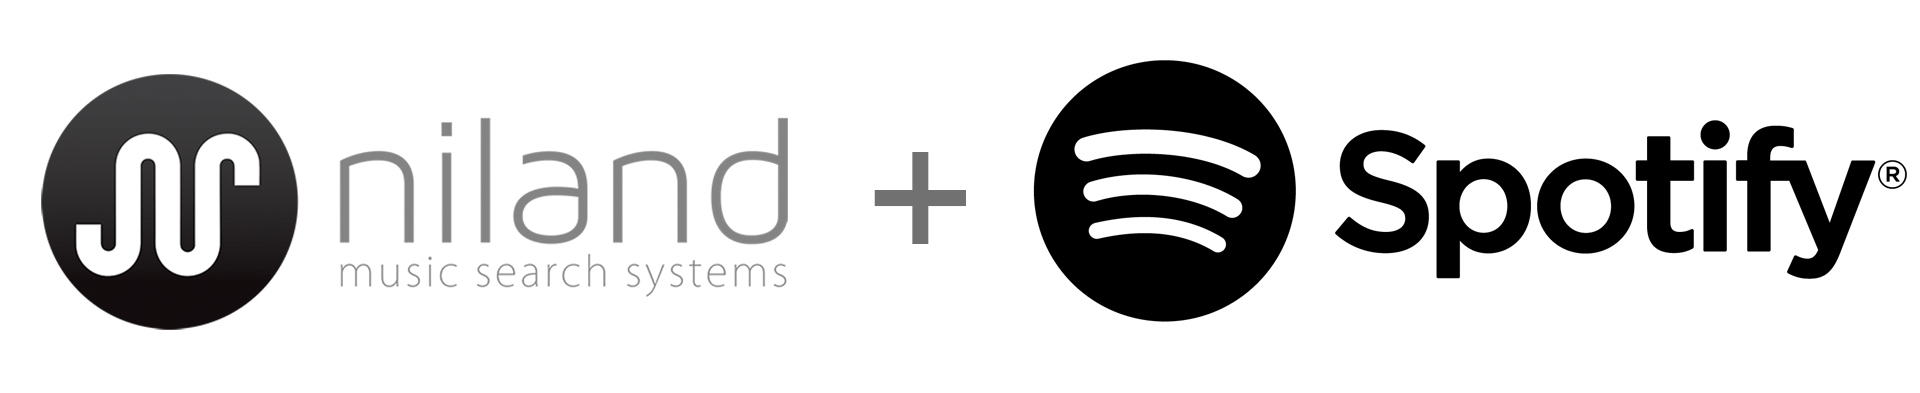 Spotify buy French startup Niland, their 4th company in just 3 months